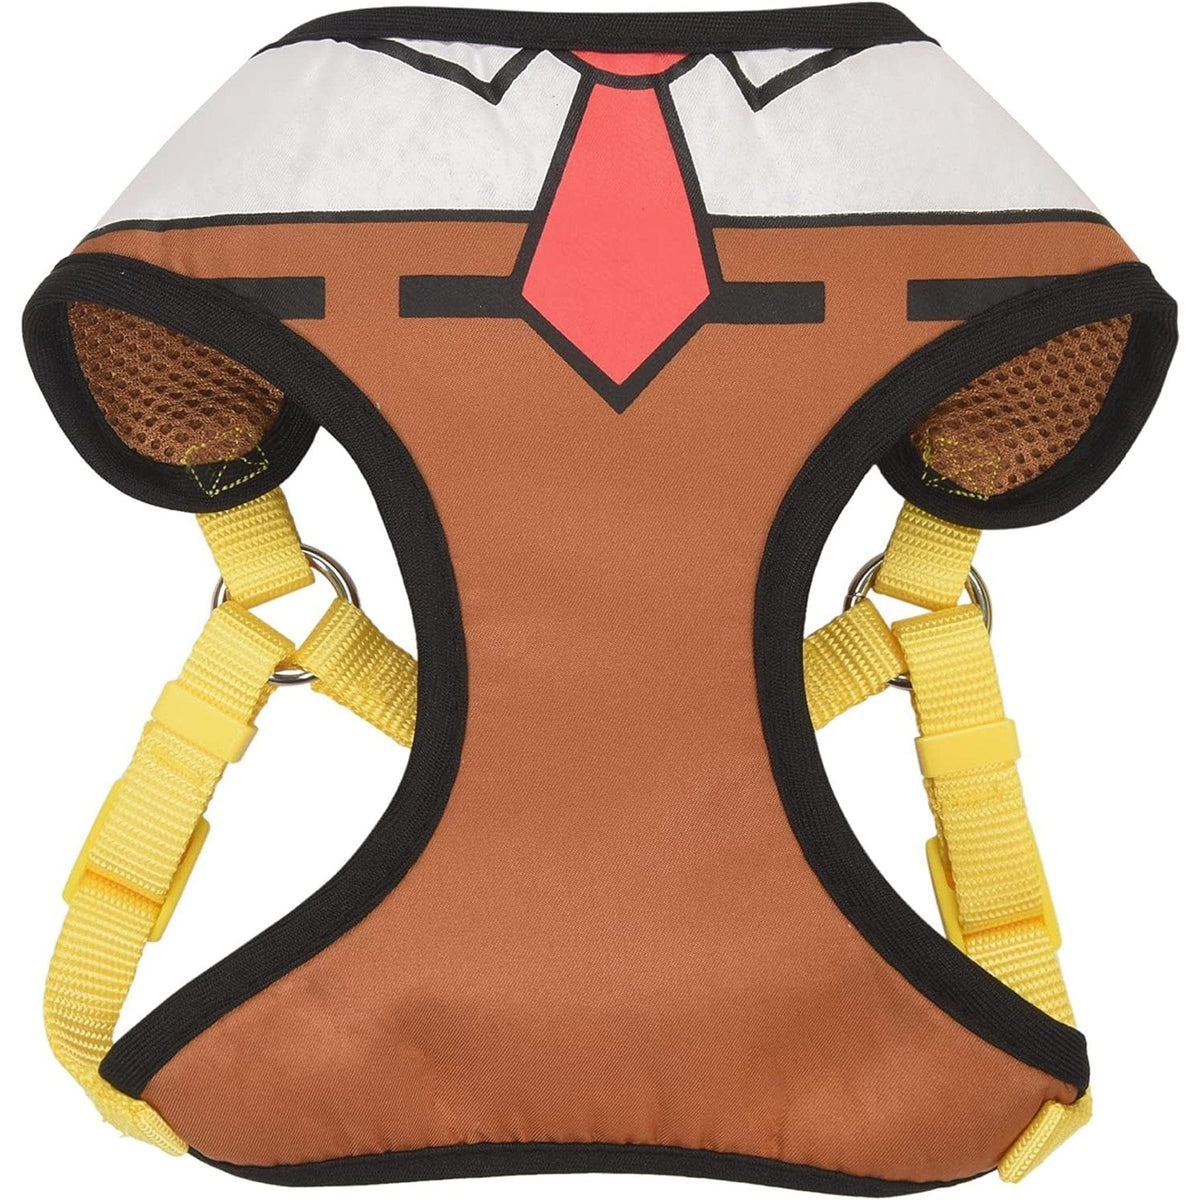 A 🐶 No-Pull SpongeBob SquarePets Dog Harness🍍 with a tie on it.